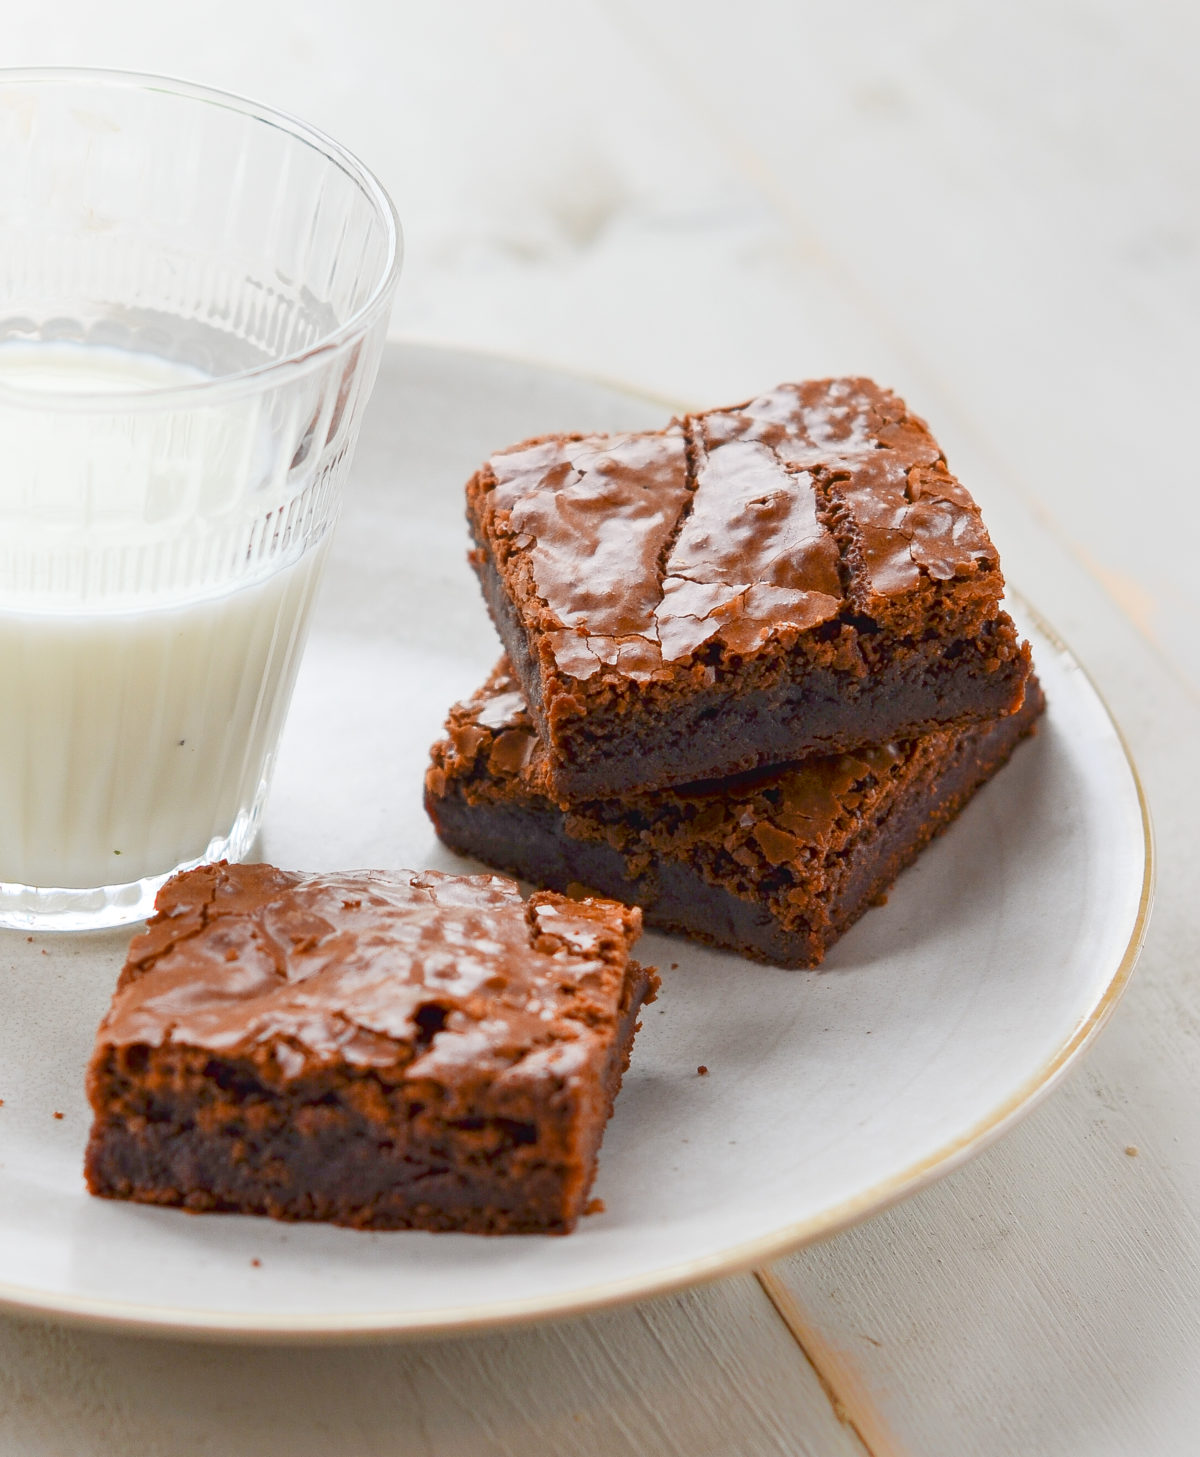 Three brownies on a plate with a glass of milk.